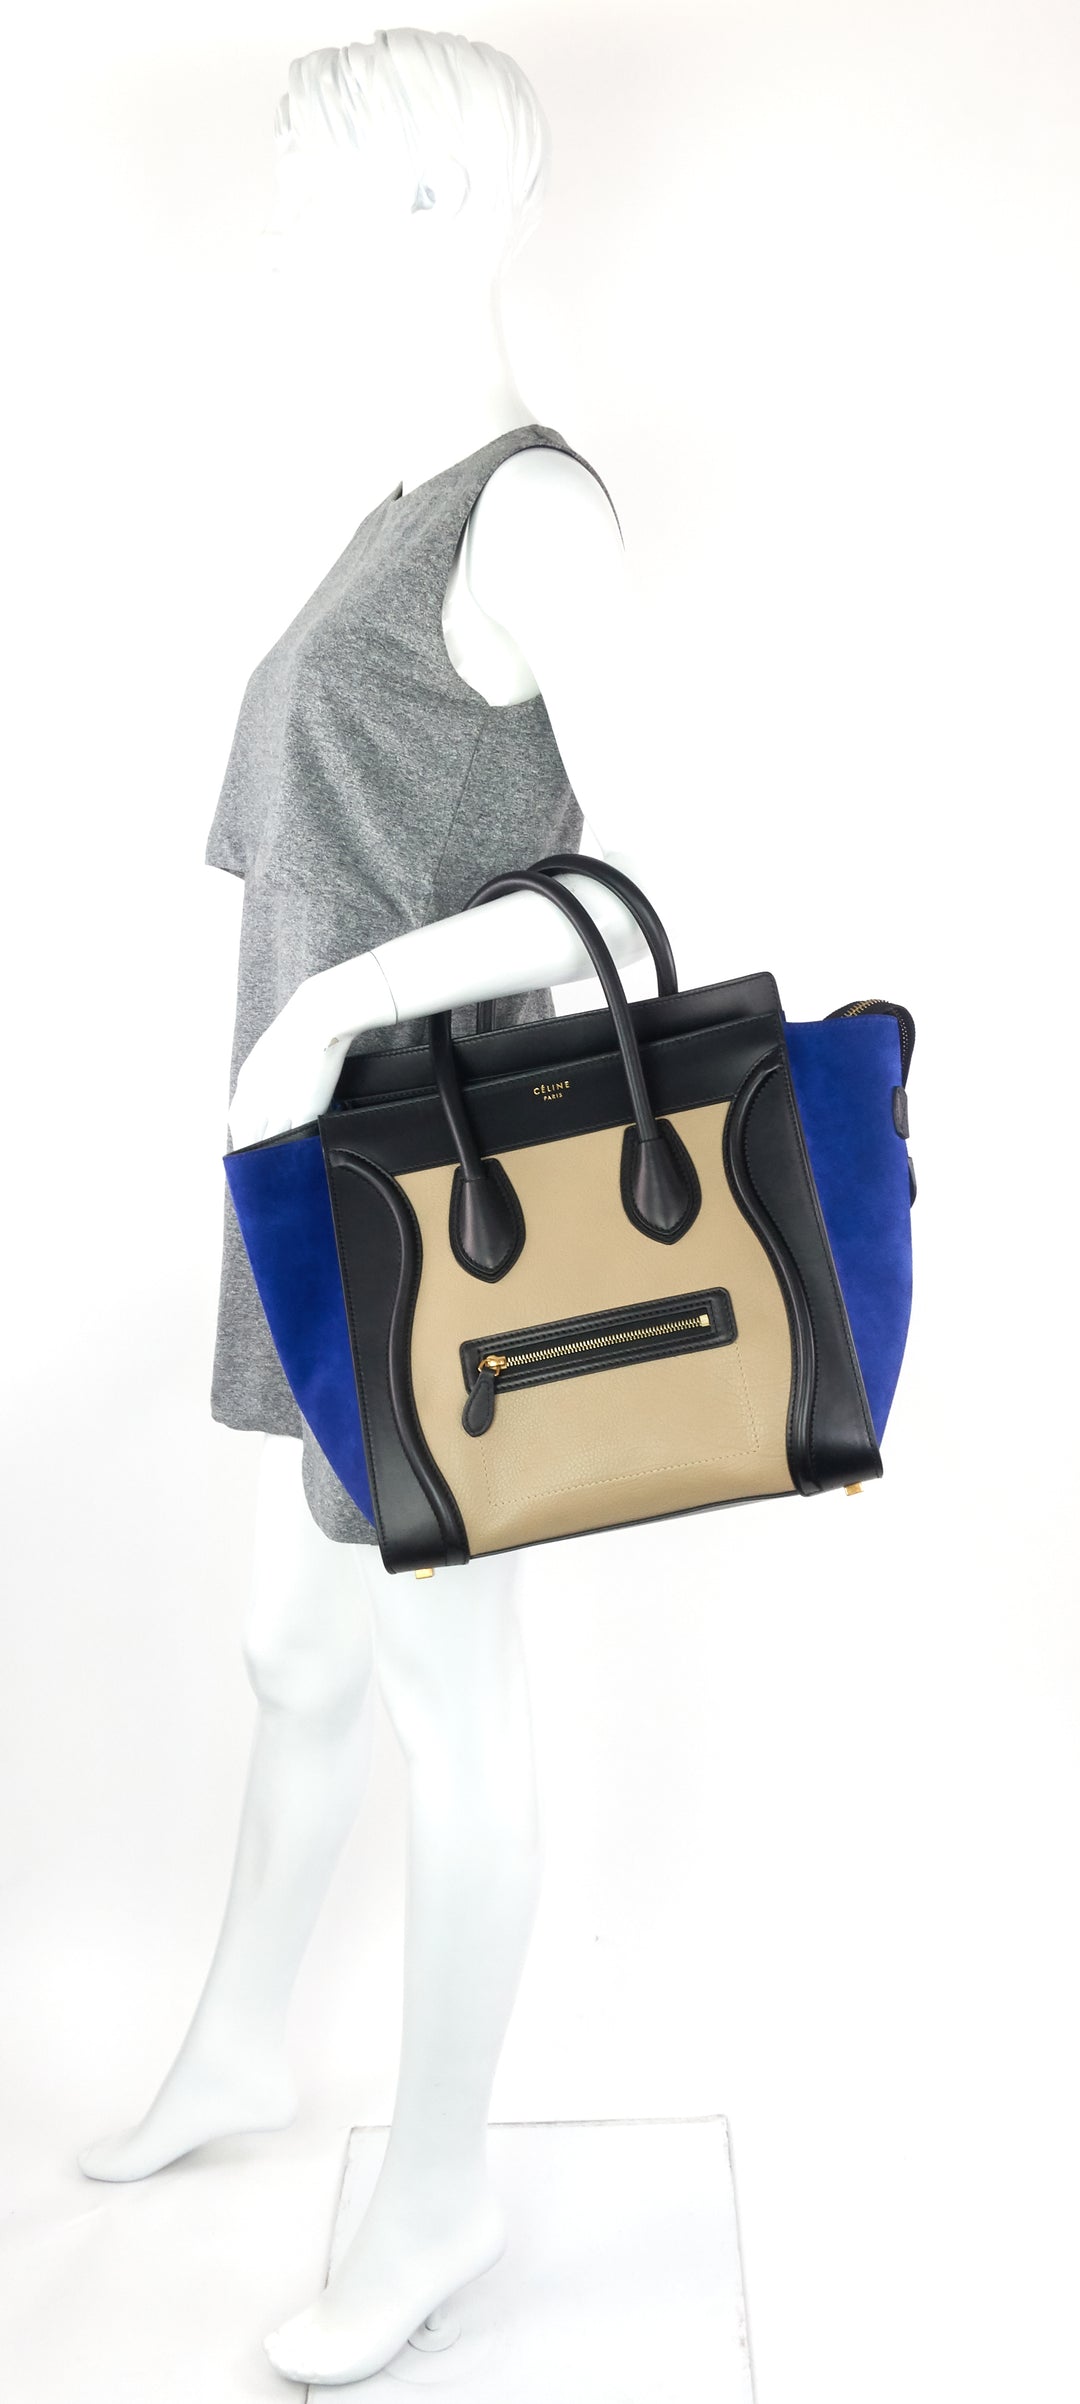 luggage mini tricolour leather and suede bag